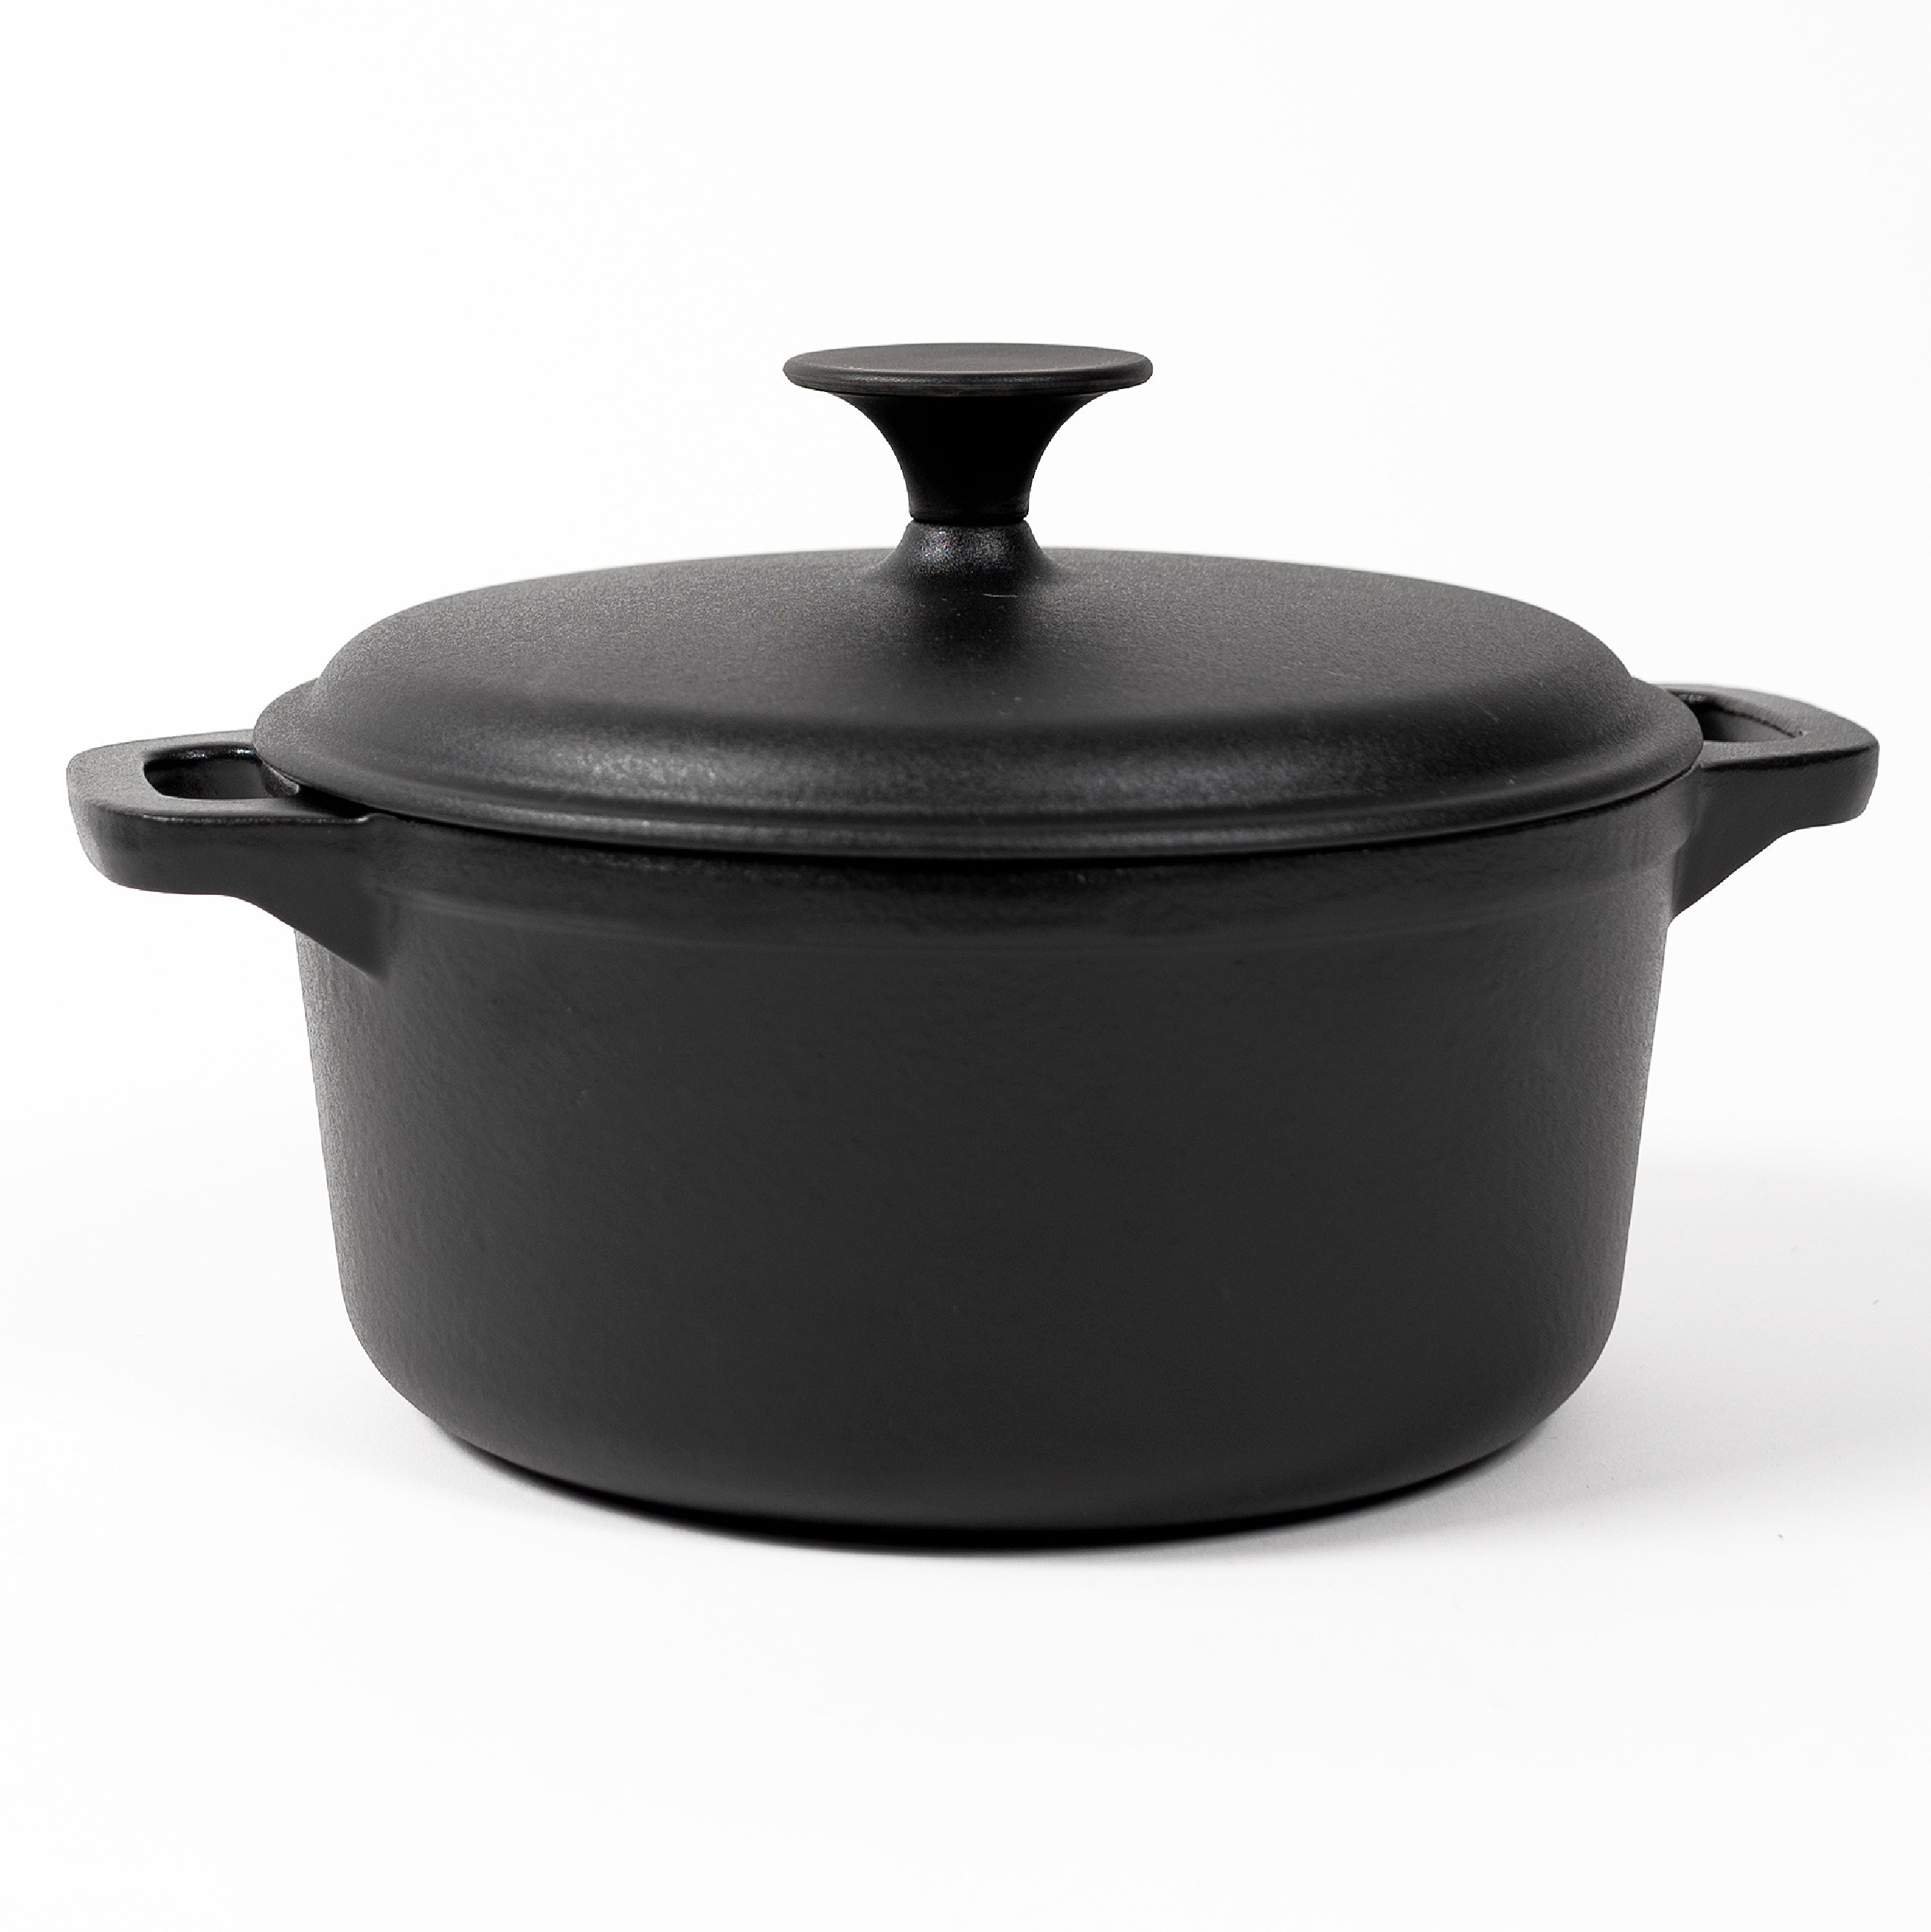 Enameled Cast Iron Casserole | Perfect for Indoor and Outdoor Use | 3QT/2.5L |